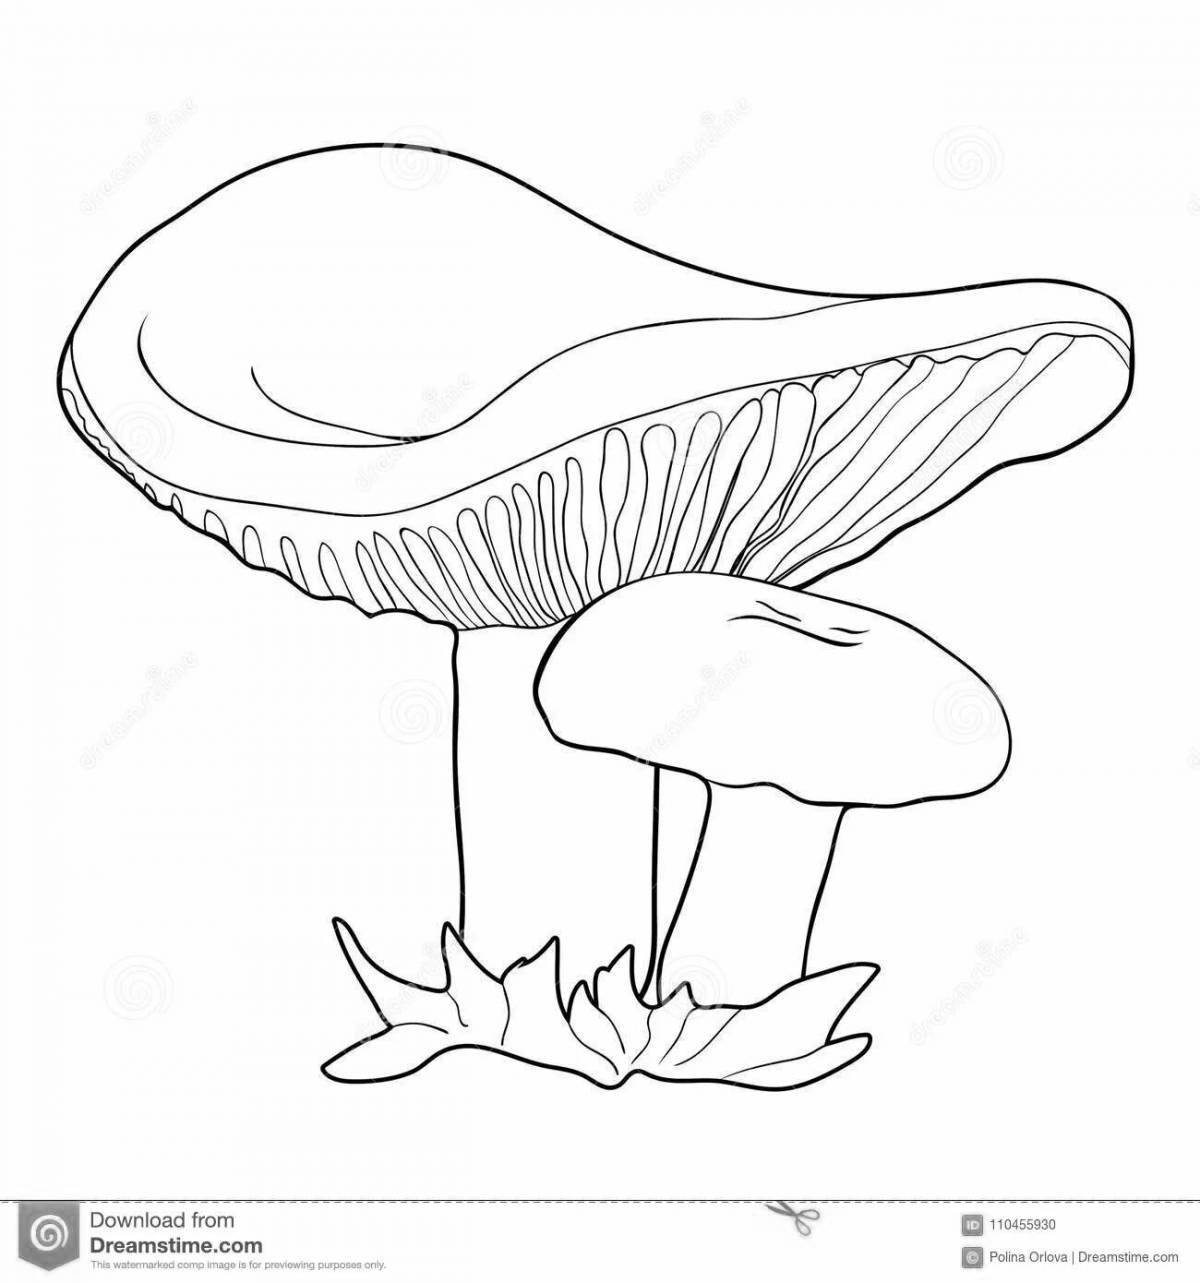 Coloring page wild russula